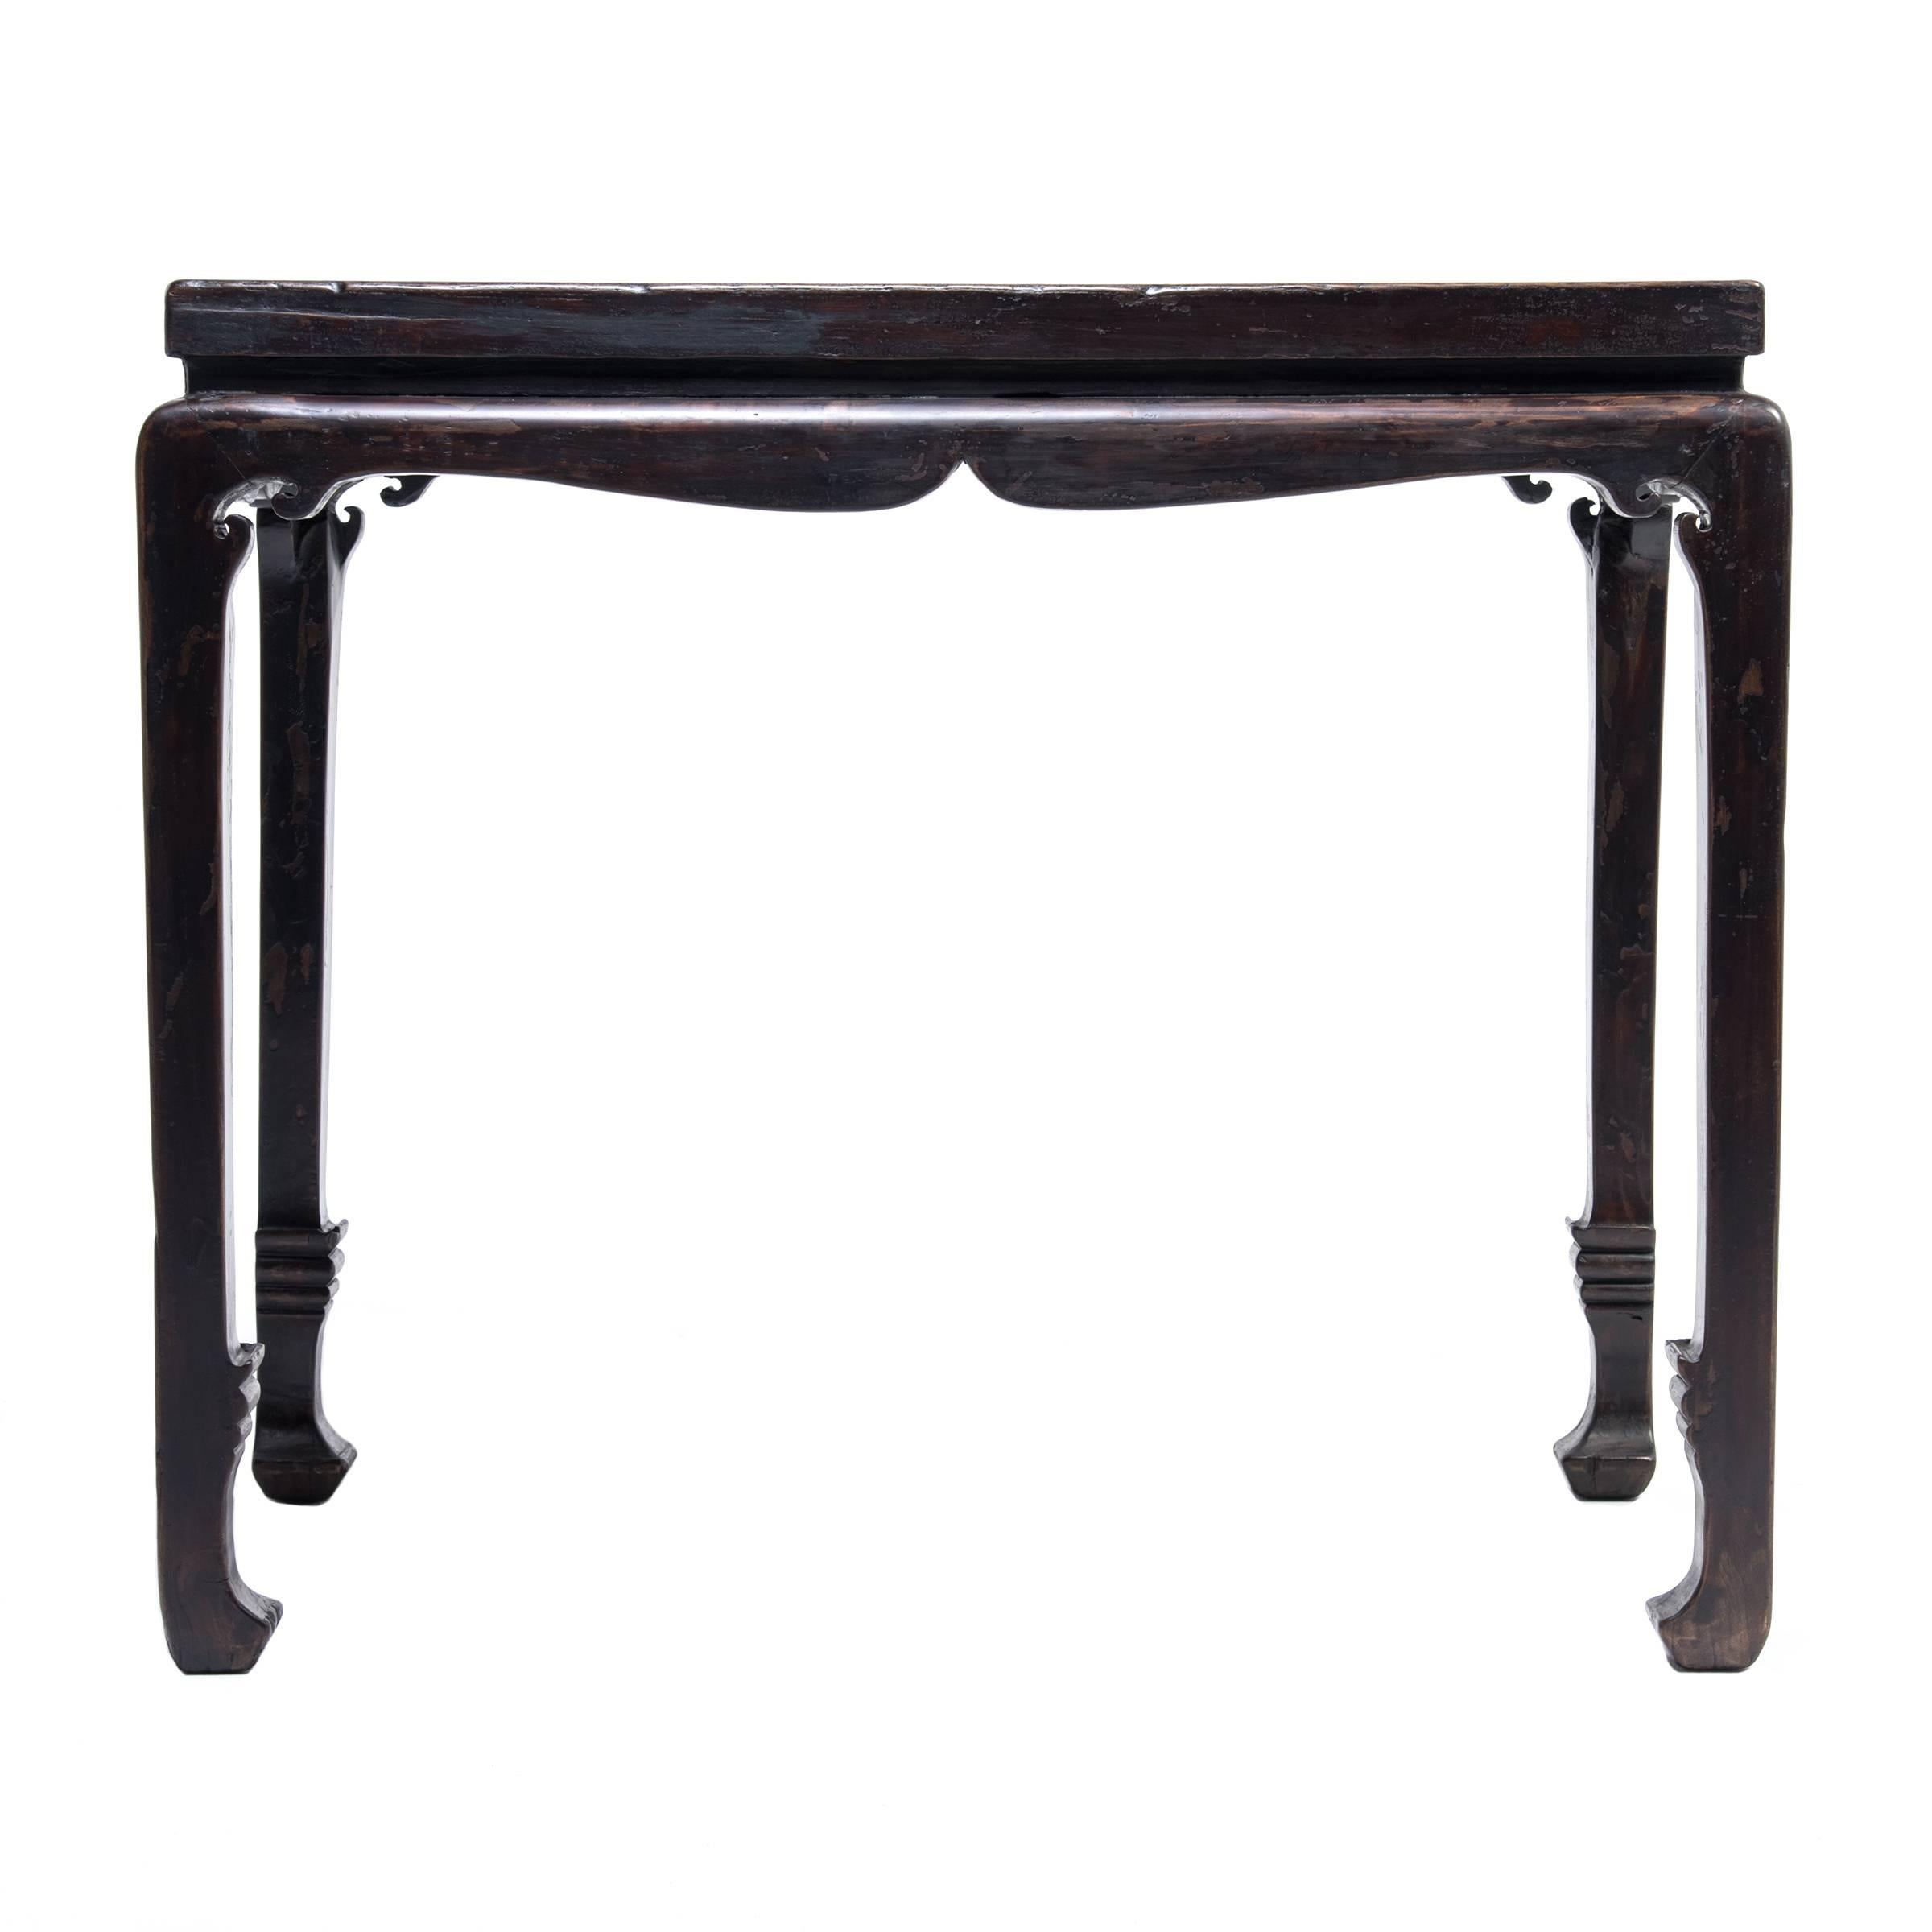 This 19th century table is styled with lyrical lines and classical proportions. It is easily identified by its arched and curved apron and the beautifully balanced abstract sword shape of its lower legs and feet. The round shoulders beneath the